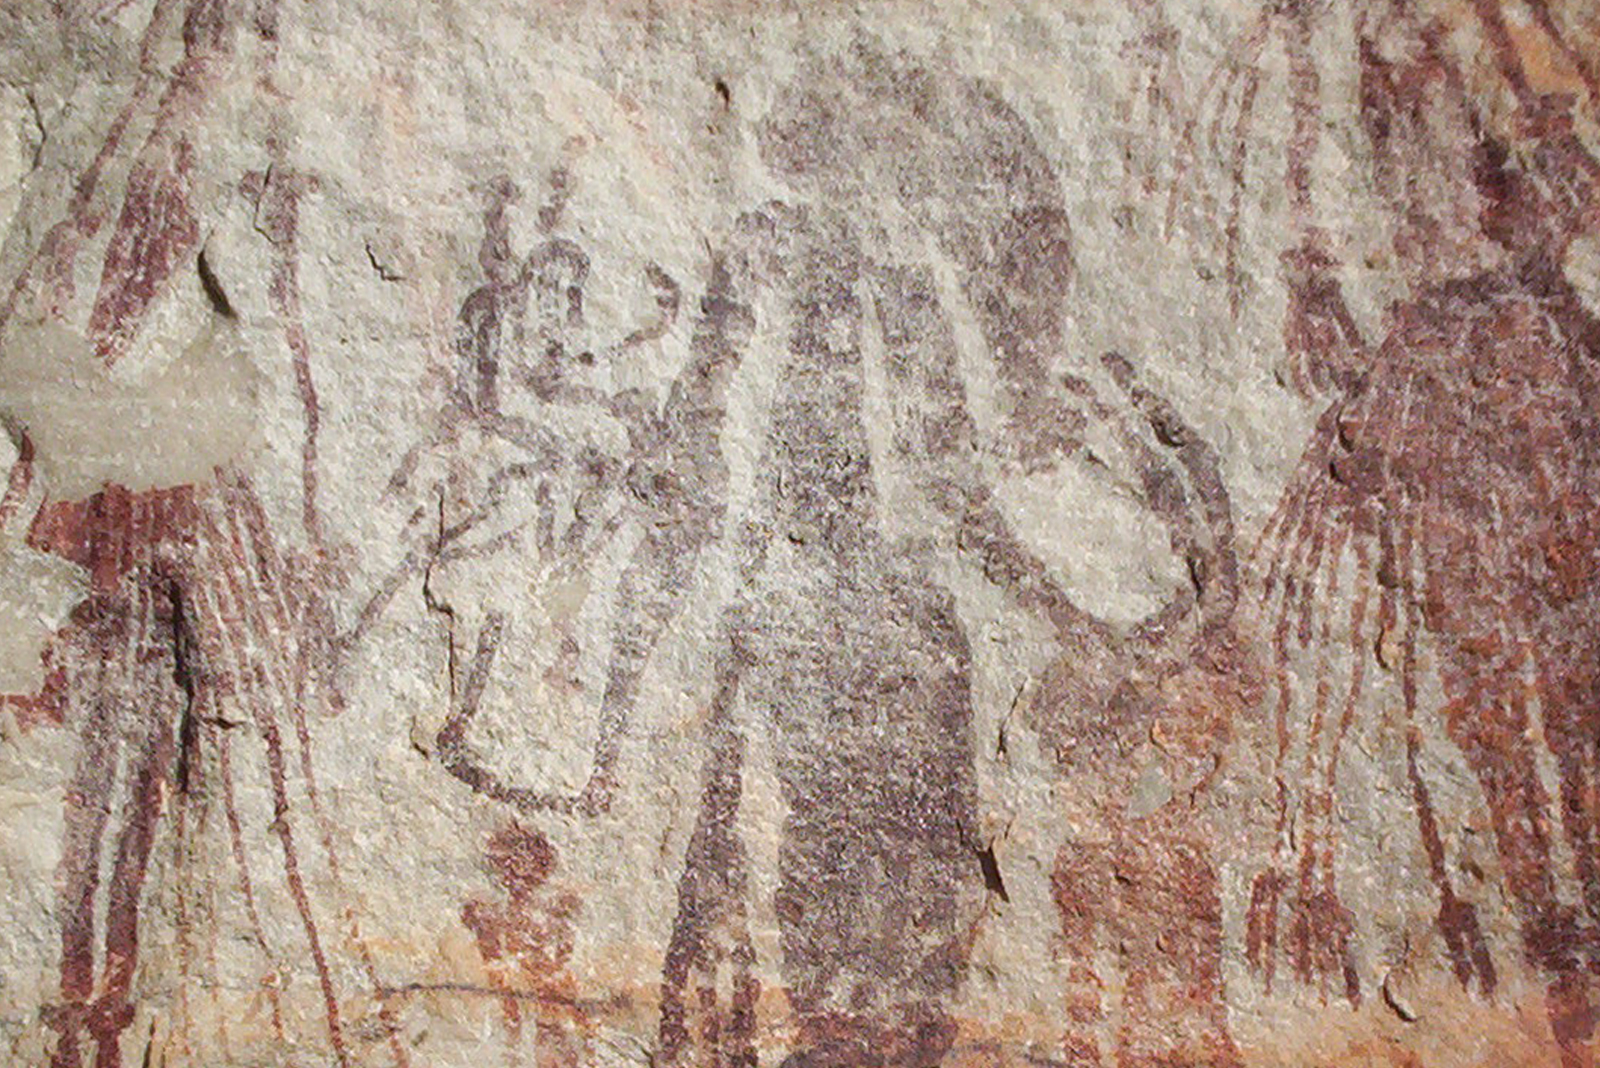 Gwion motif rock art from the Kimberley